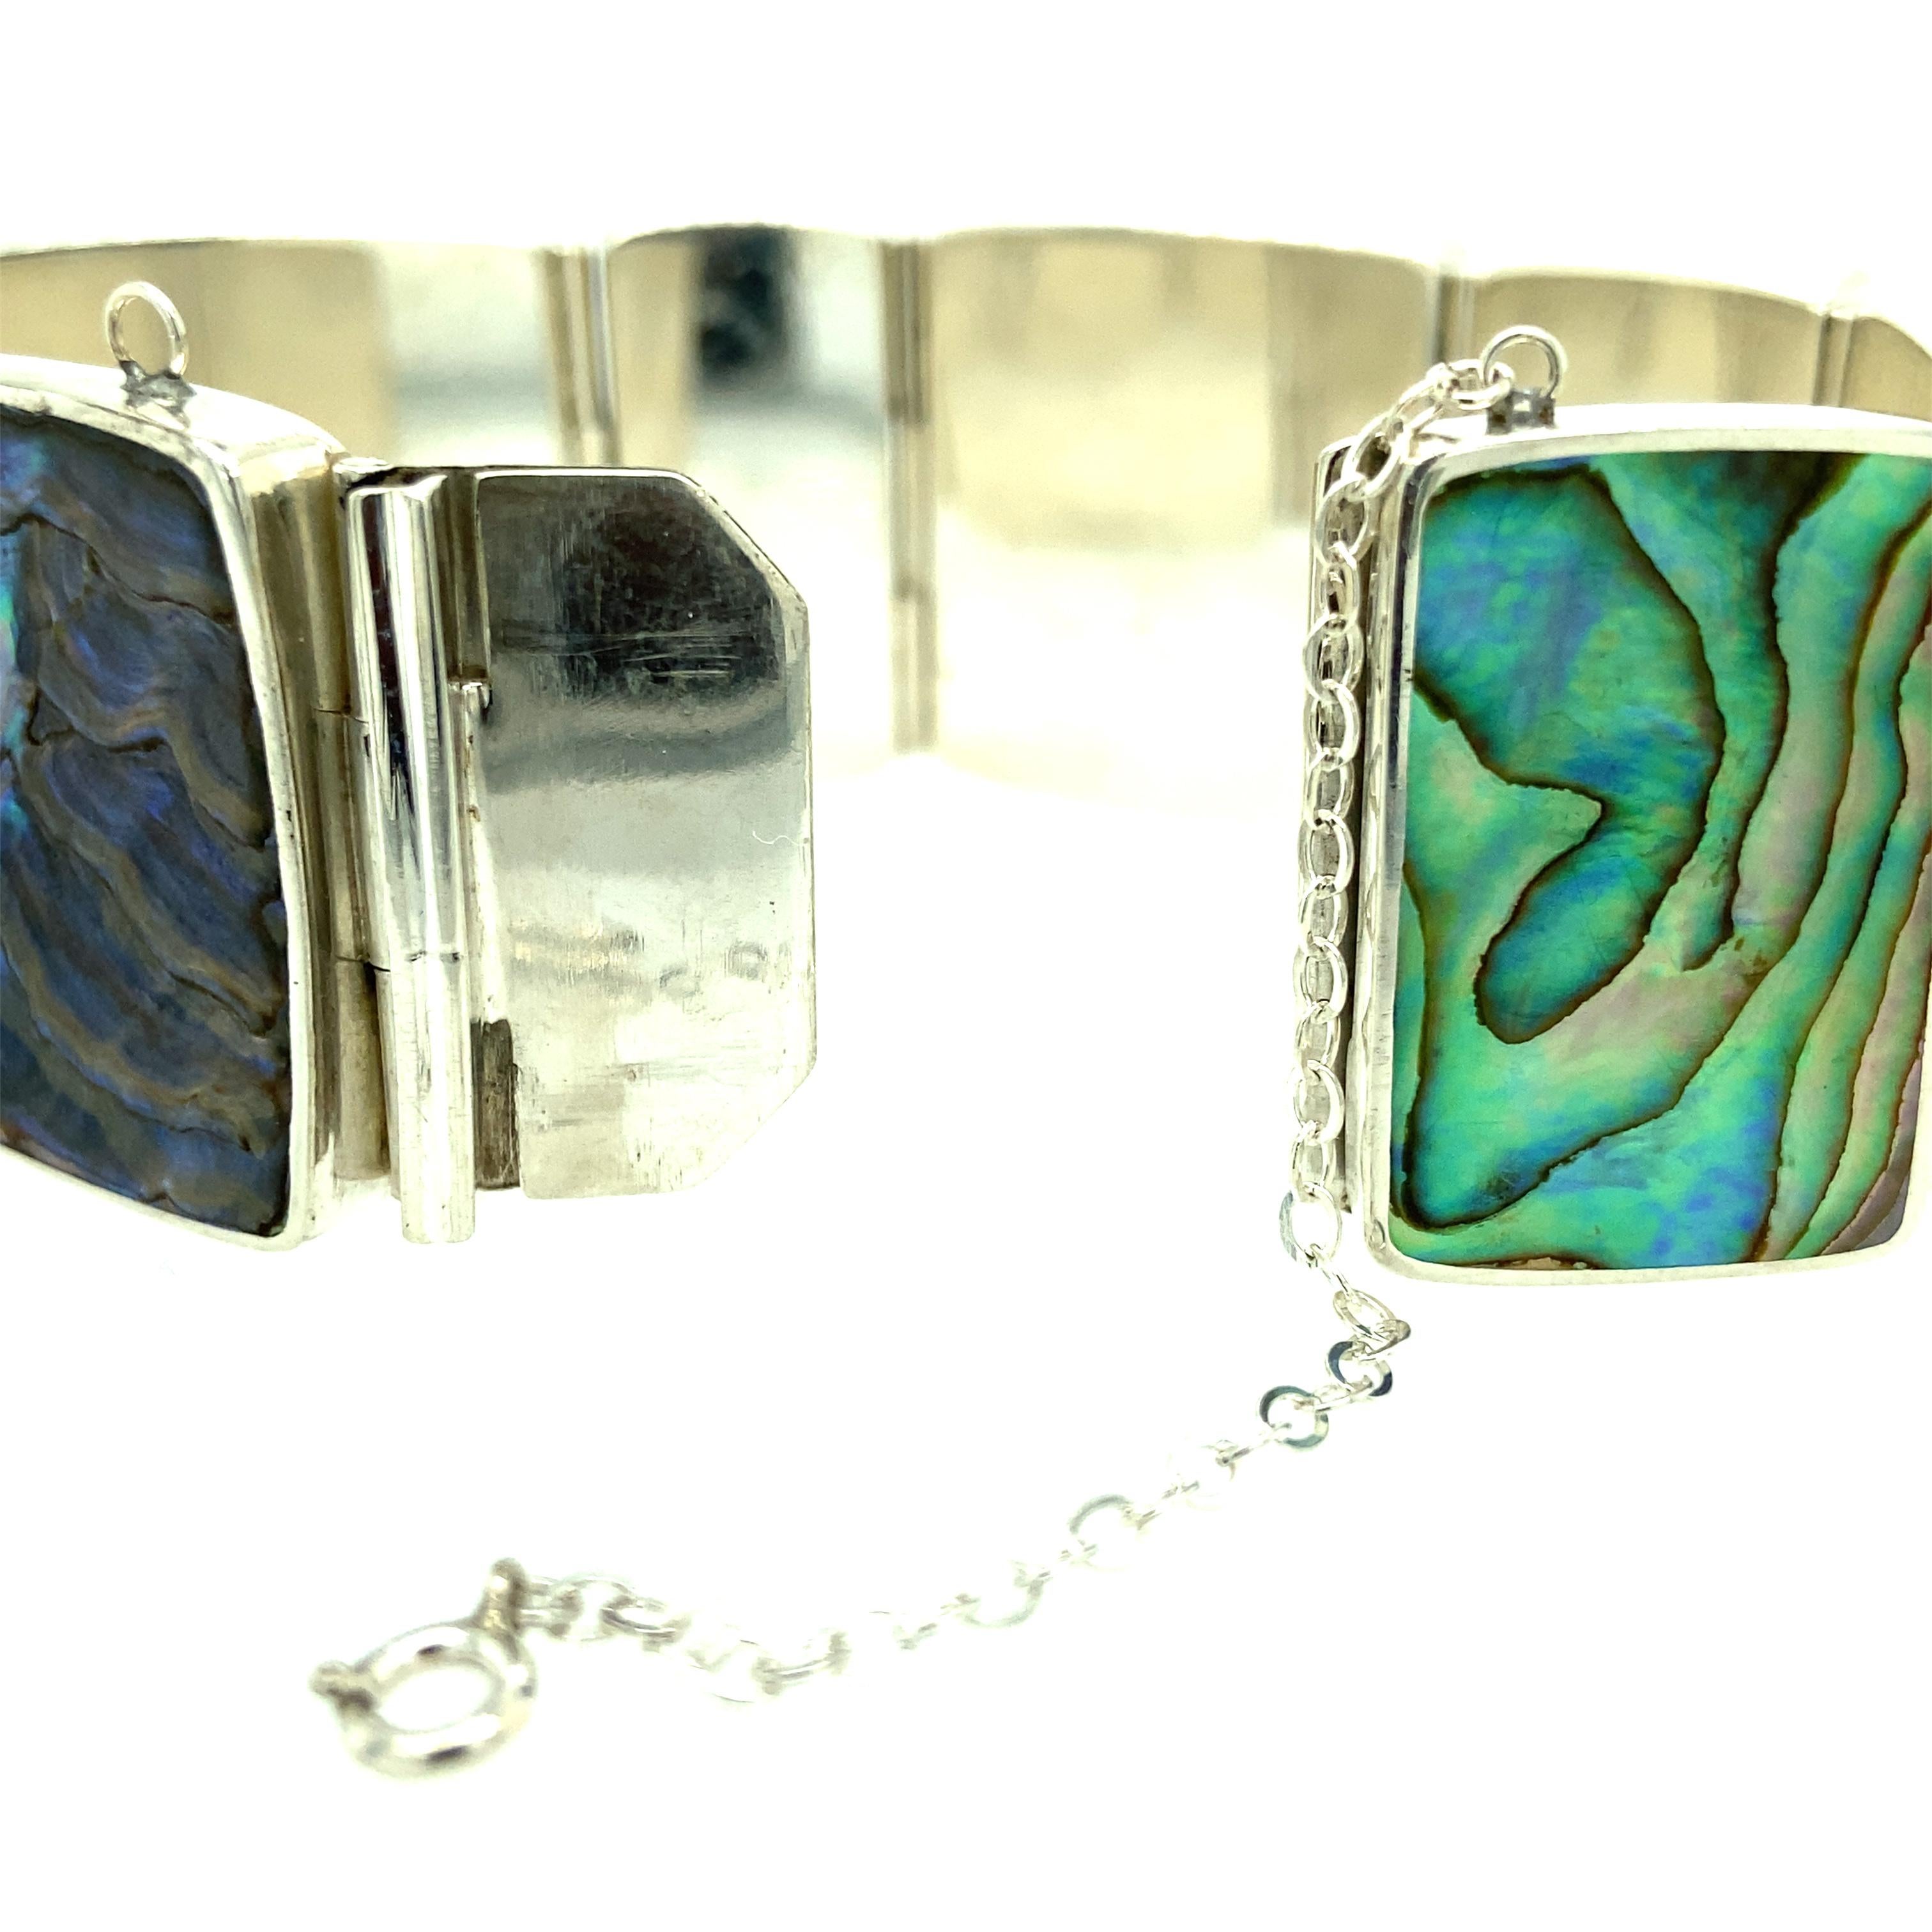 One sterling silver (stamped P. Bis STERLING DENMARK HANDMADE) handmade abalone shell bracelet measuring 7 inches long and a little over an inch wide.  The bracelet is complete with a hidden closure and safety chain. Circa 1970s.